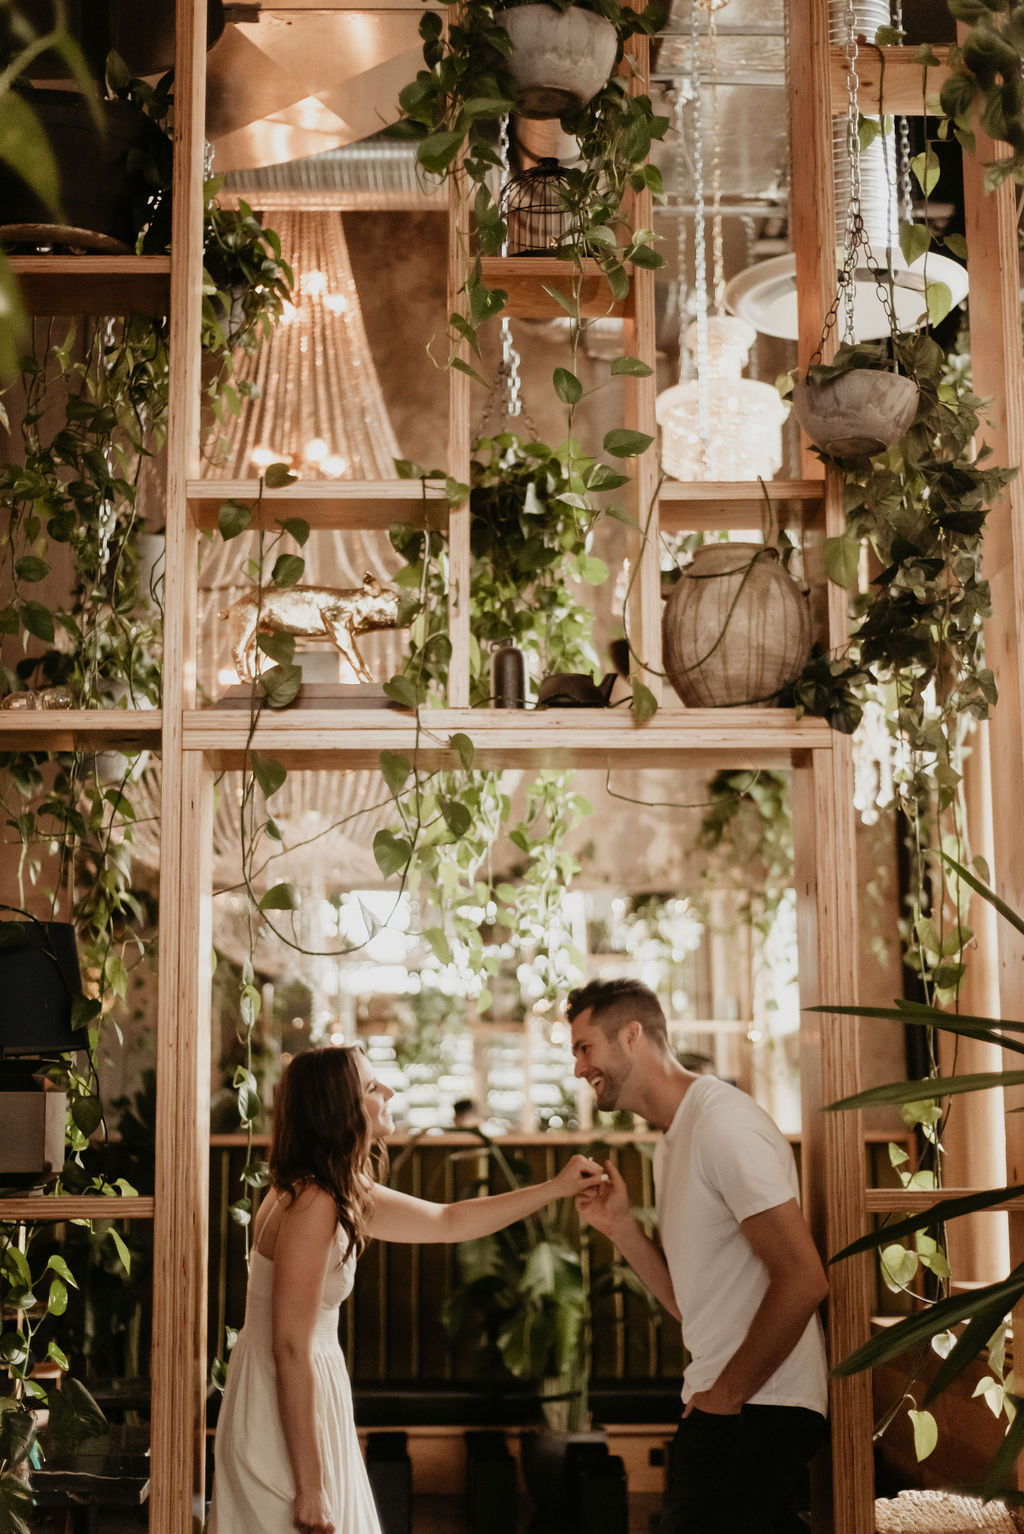 Botanical bliss for this earthy restaurant engagement session